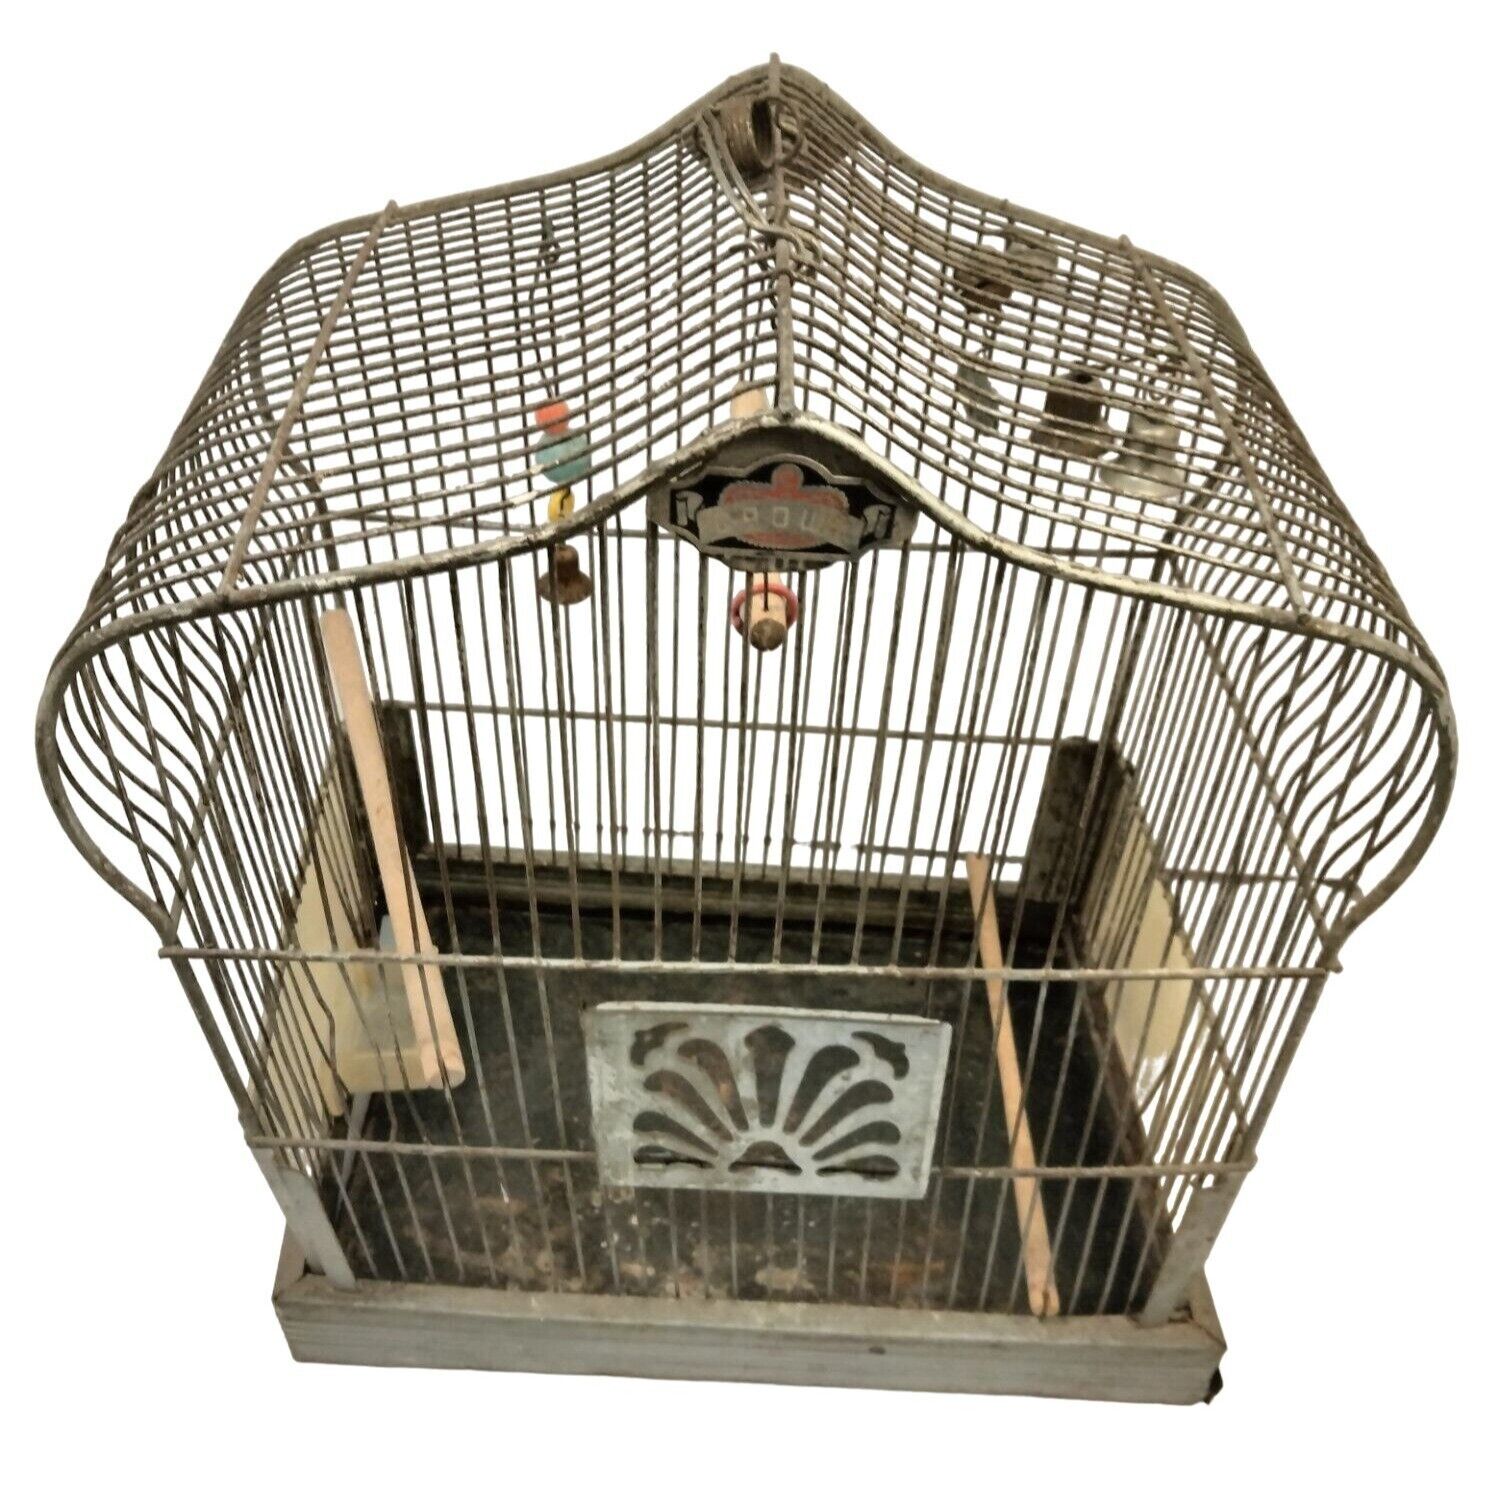 Crown Metal Bird Cage Antique Distressed Shabby Swing